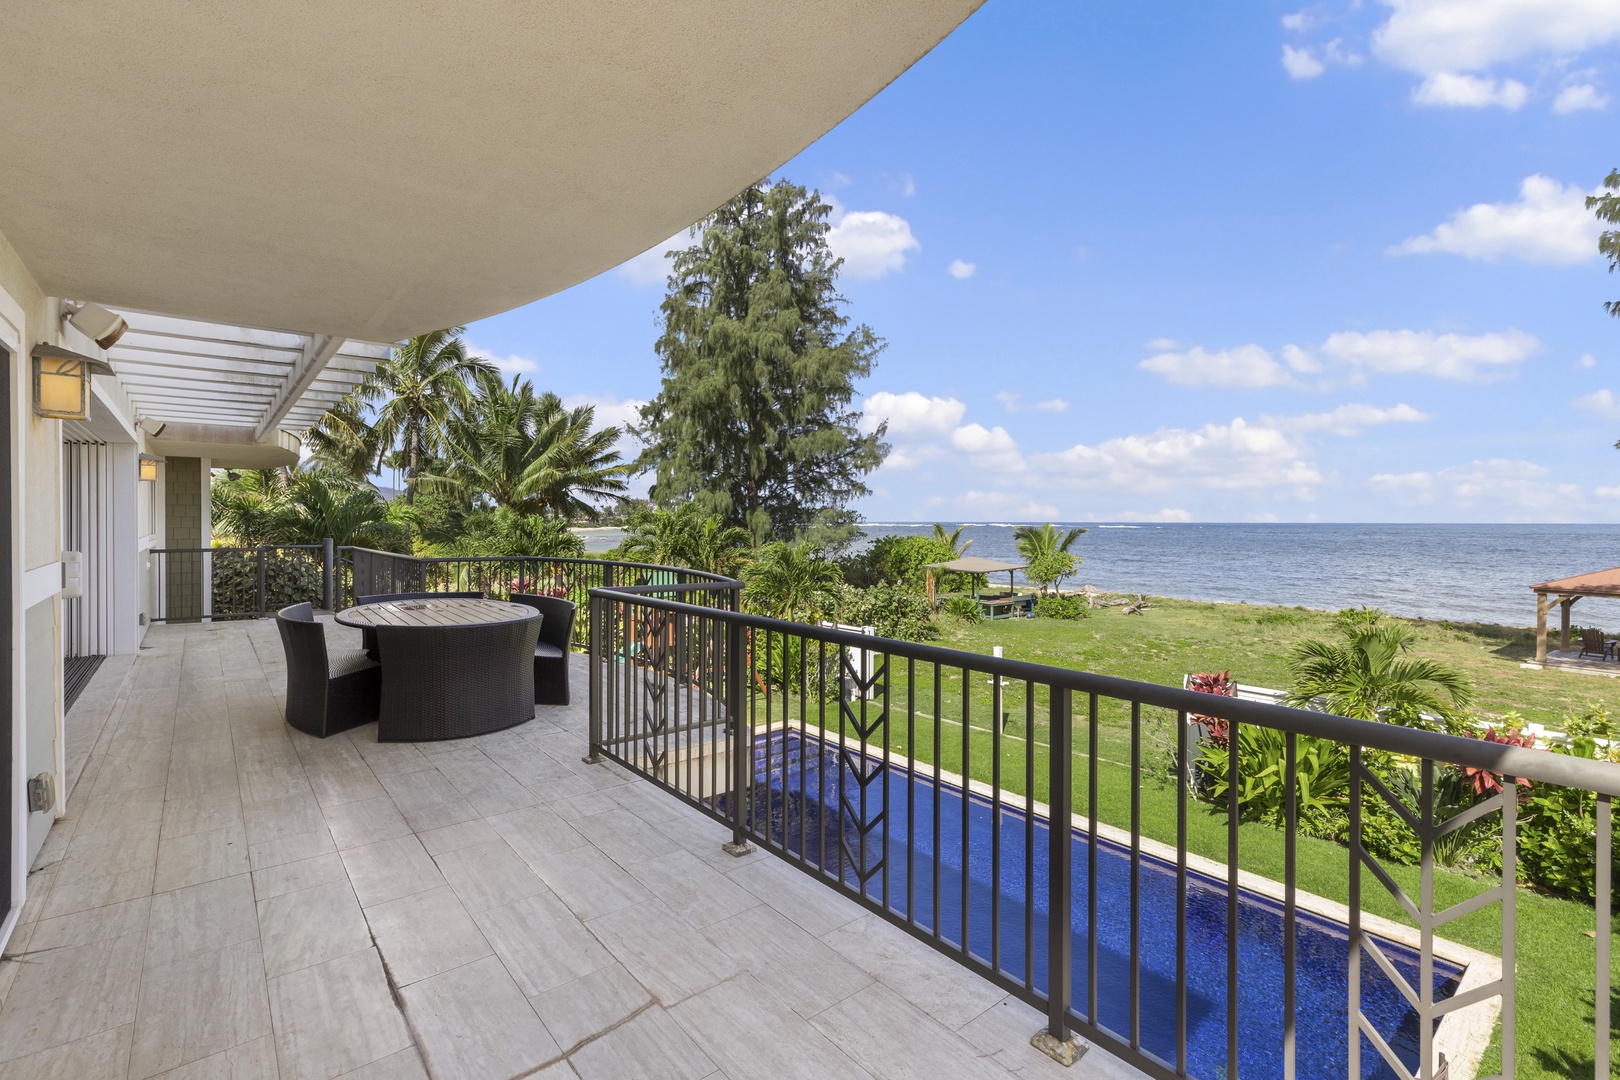 Waialua Vacation Rentals, Kala'iku Main - Second-floor entertaining deck with a view of the pool and ocean.